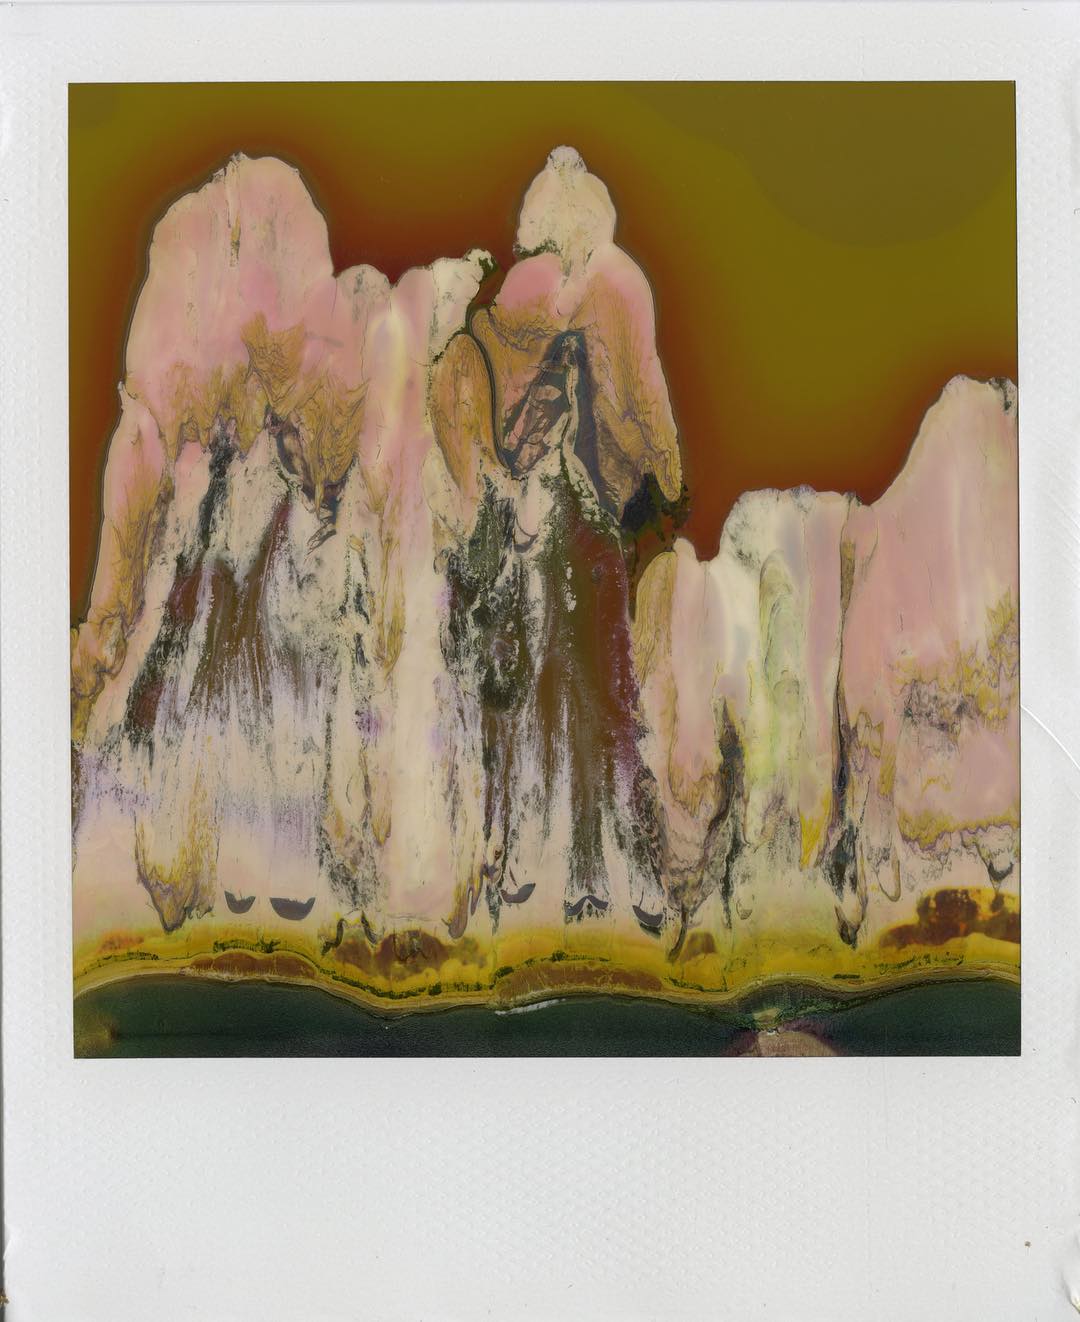 Bermuda Two #aprilfailsday For a time, Impossible Project occasionally produced a pack that would eject multiple sheets at a time. I brought one of those packs (unintentionally) on a vacation to Bermuda a few years ago. #film #filmphotography #polaroid #sx70